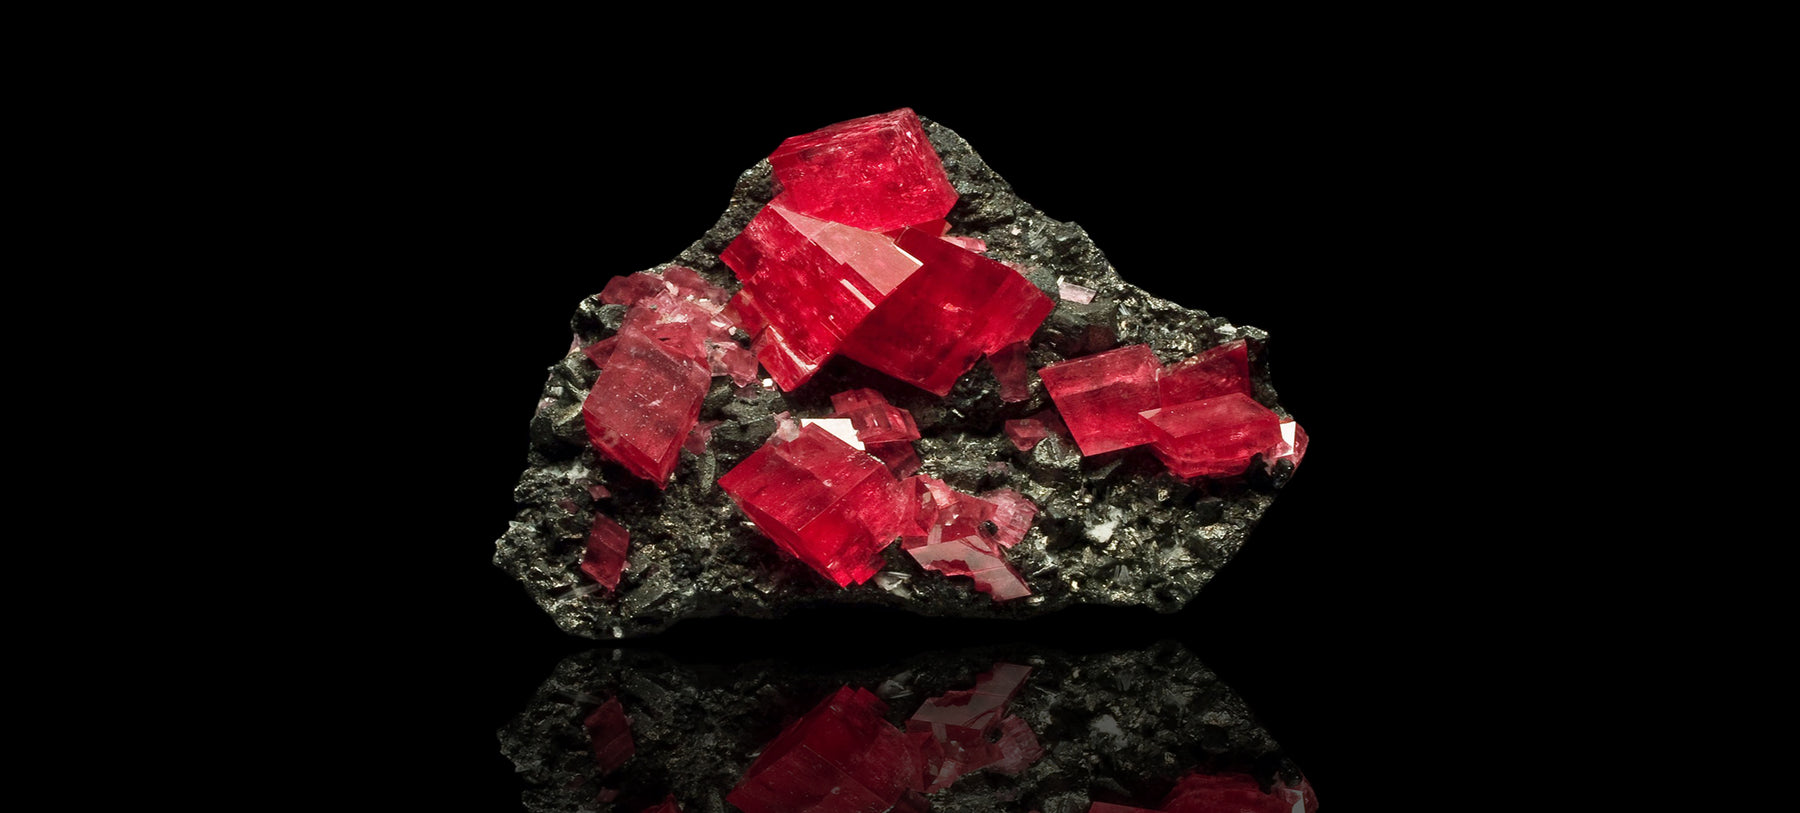 Rhodochrosite mineral gemstone healing and energetic properties and meaning